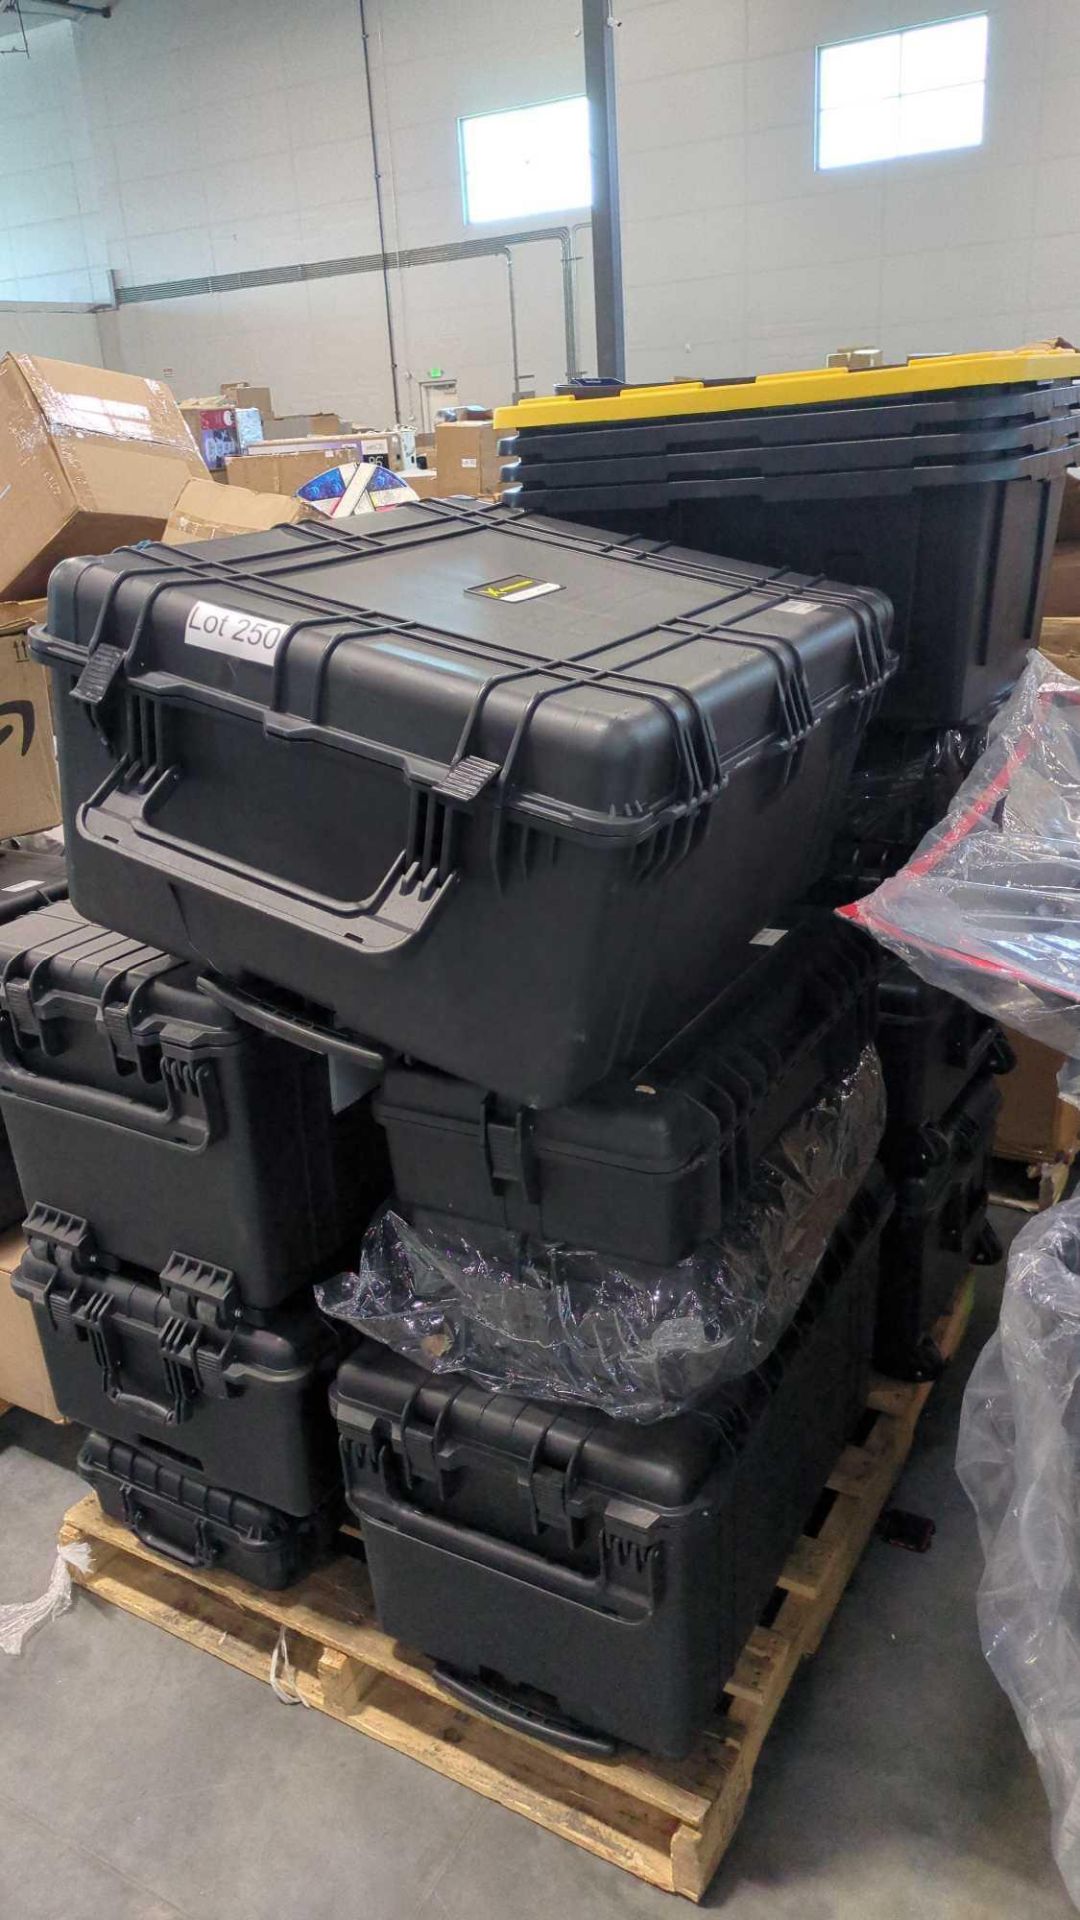 pallet of multiple sizes of waterproof travel cases and storage bins - Image 4 of 4